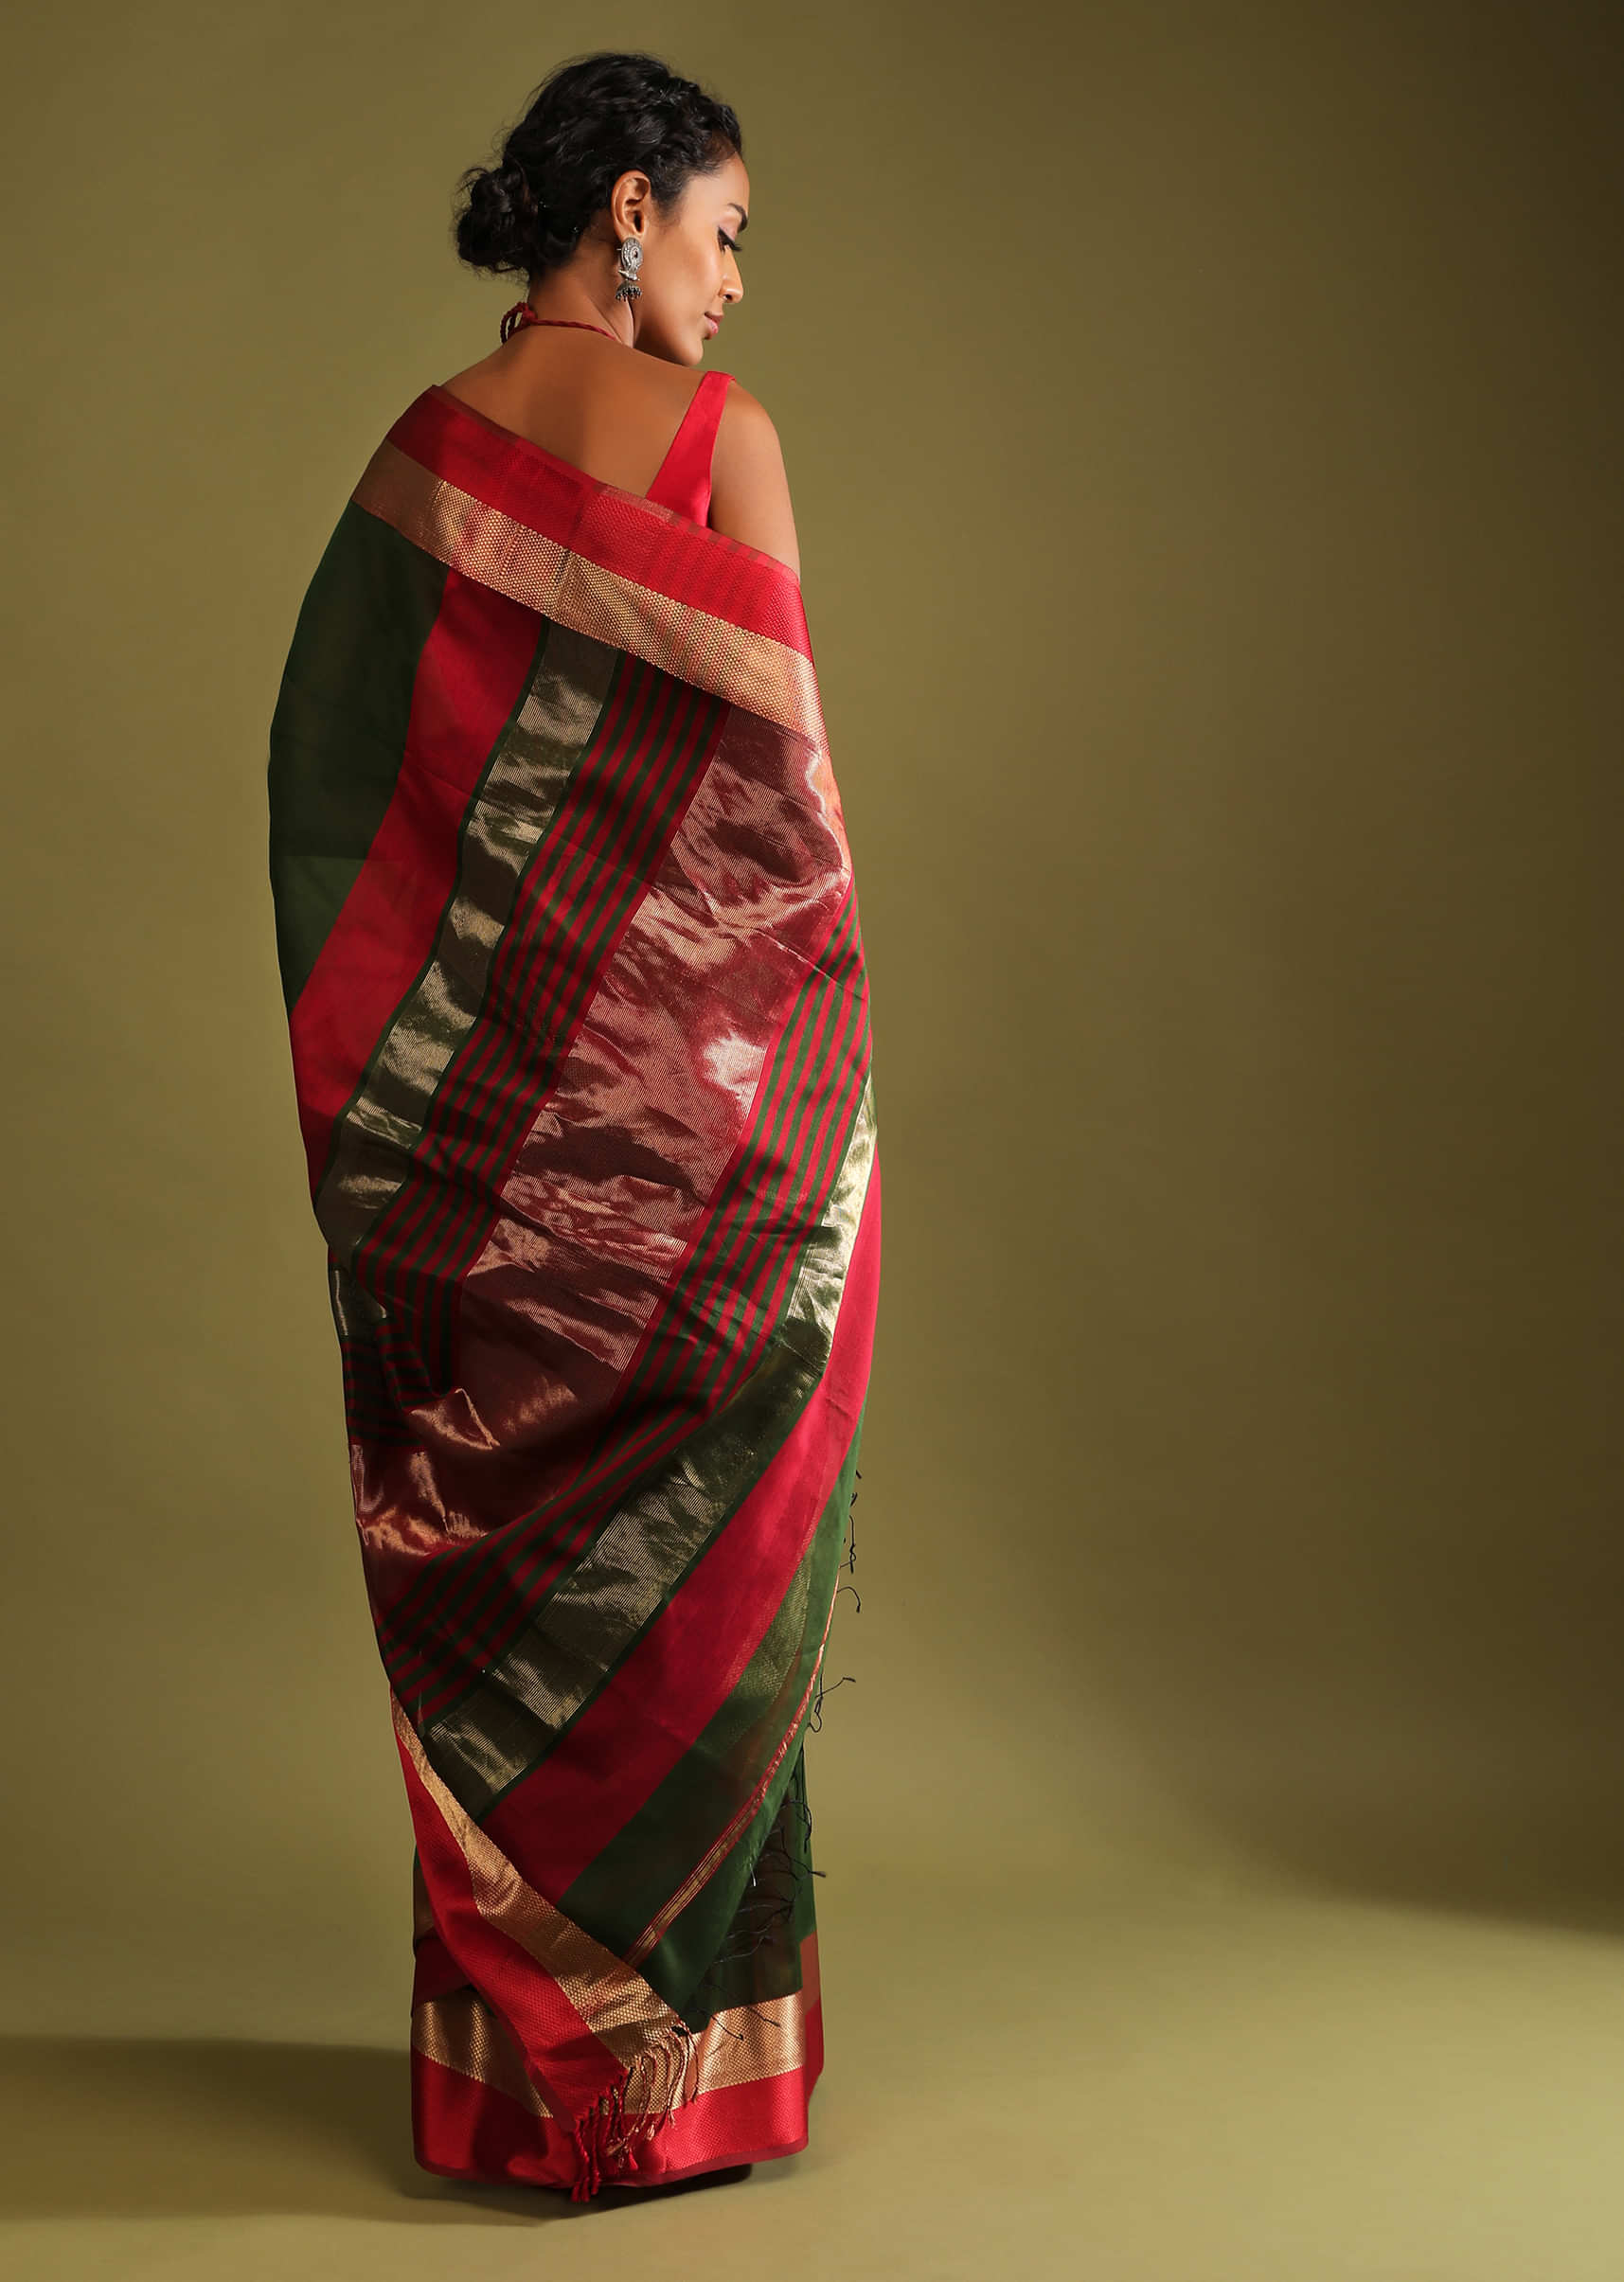 Cypress Green Saree In Tussar Silk With Gold And Red Woven Border And Striped Pallu Design  